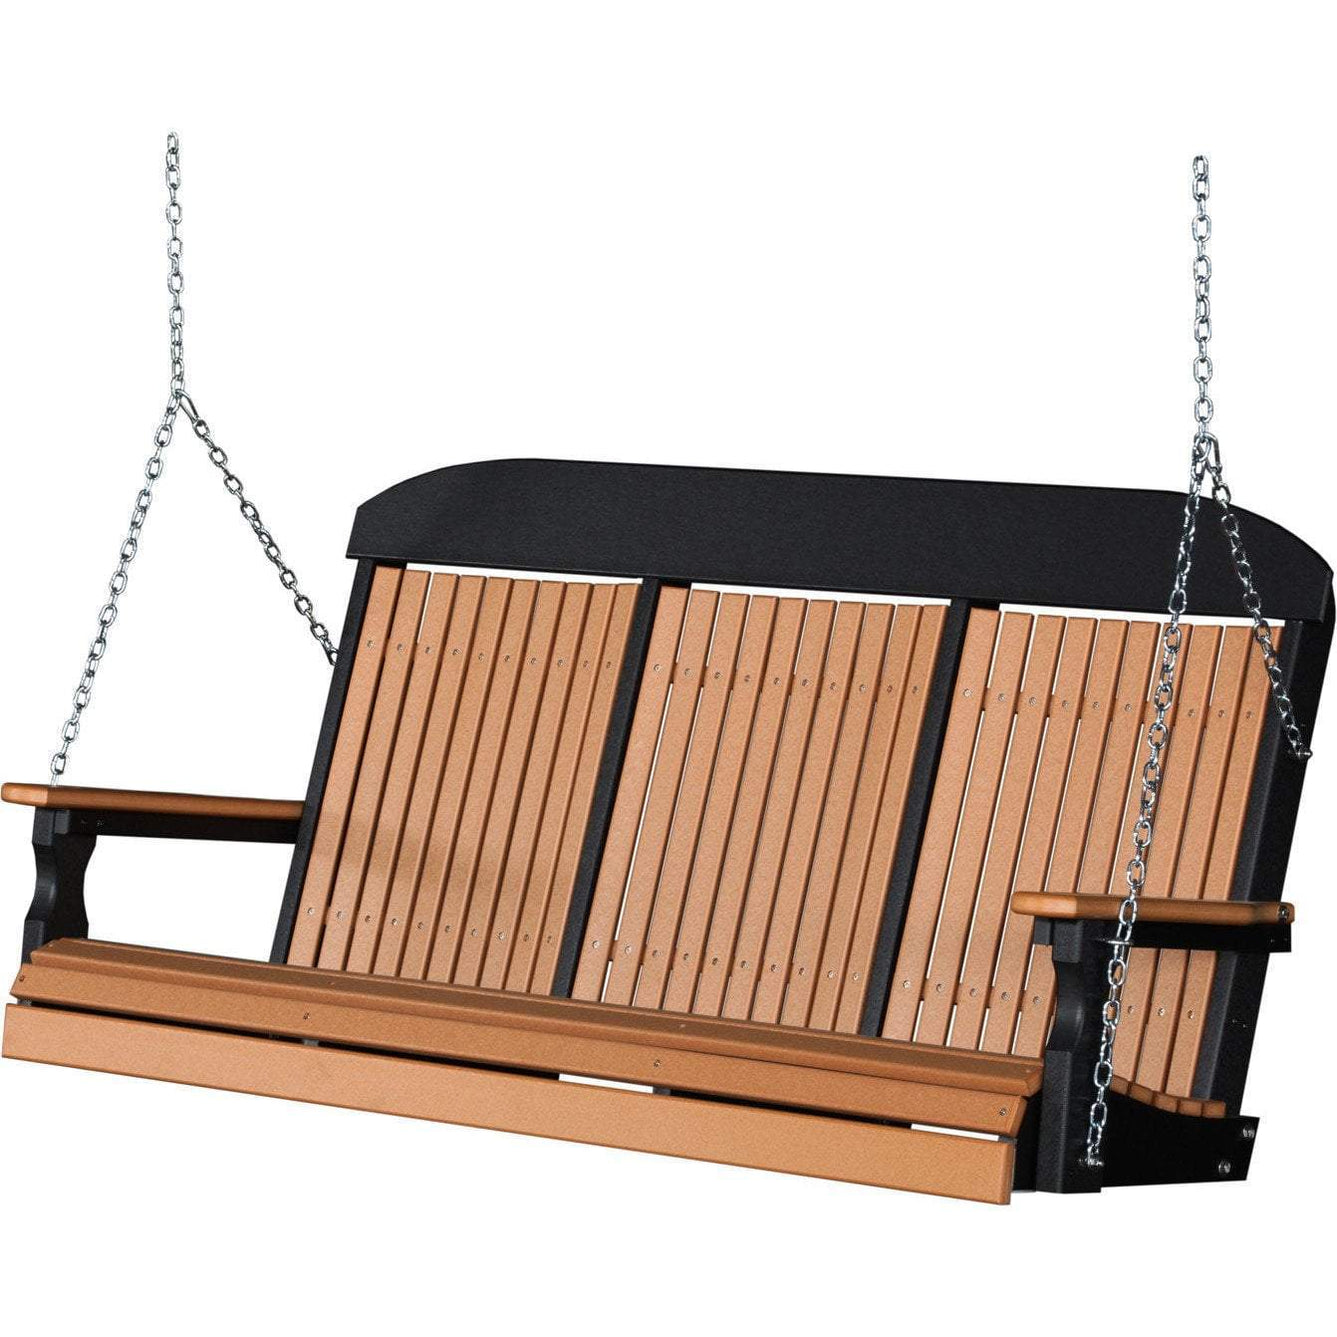 5 Ft Luxcraft Swing Classic Porch Swing With High Back — The Porch Swing Store